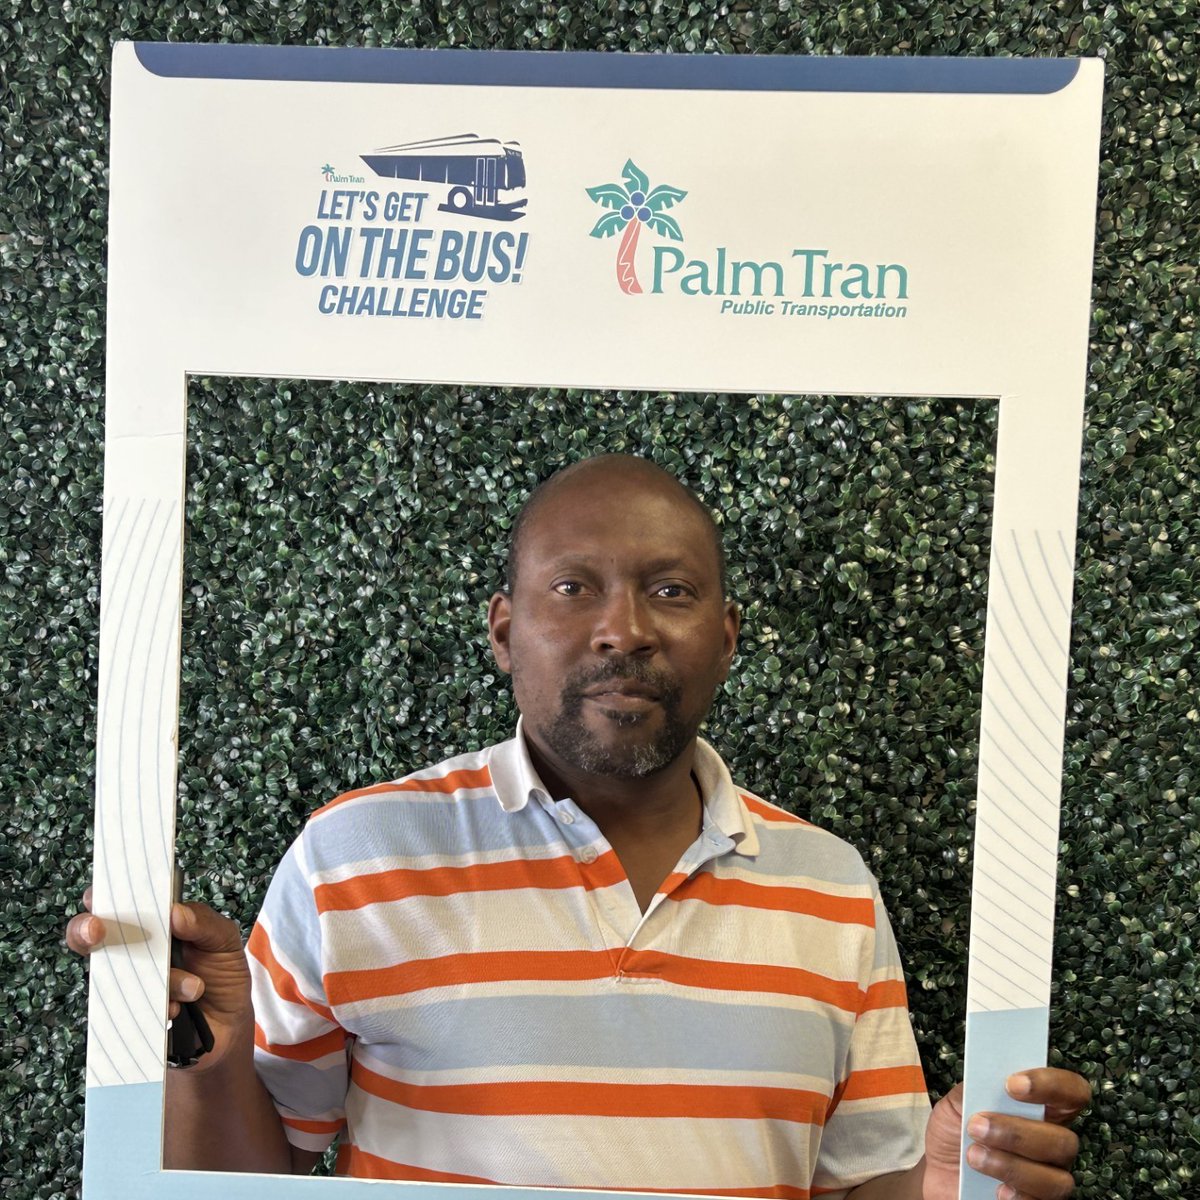 🎉 🚎 Big cheers to Eddie Tremble, our superstar rider in the Let's Get On The Bus Challenge! 🚌 Thanks for bringing the energy, Eddie—you're unstoppable! 🌟 And guess what? Eddie scored tickets from our awesome sponsor, the Cox Science Museum! 🚀🎊 #PalmTranChallenge #PalmTran